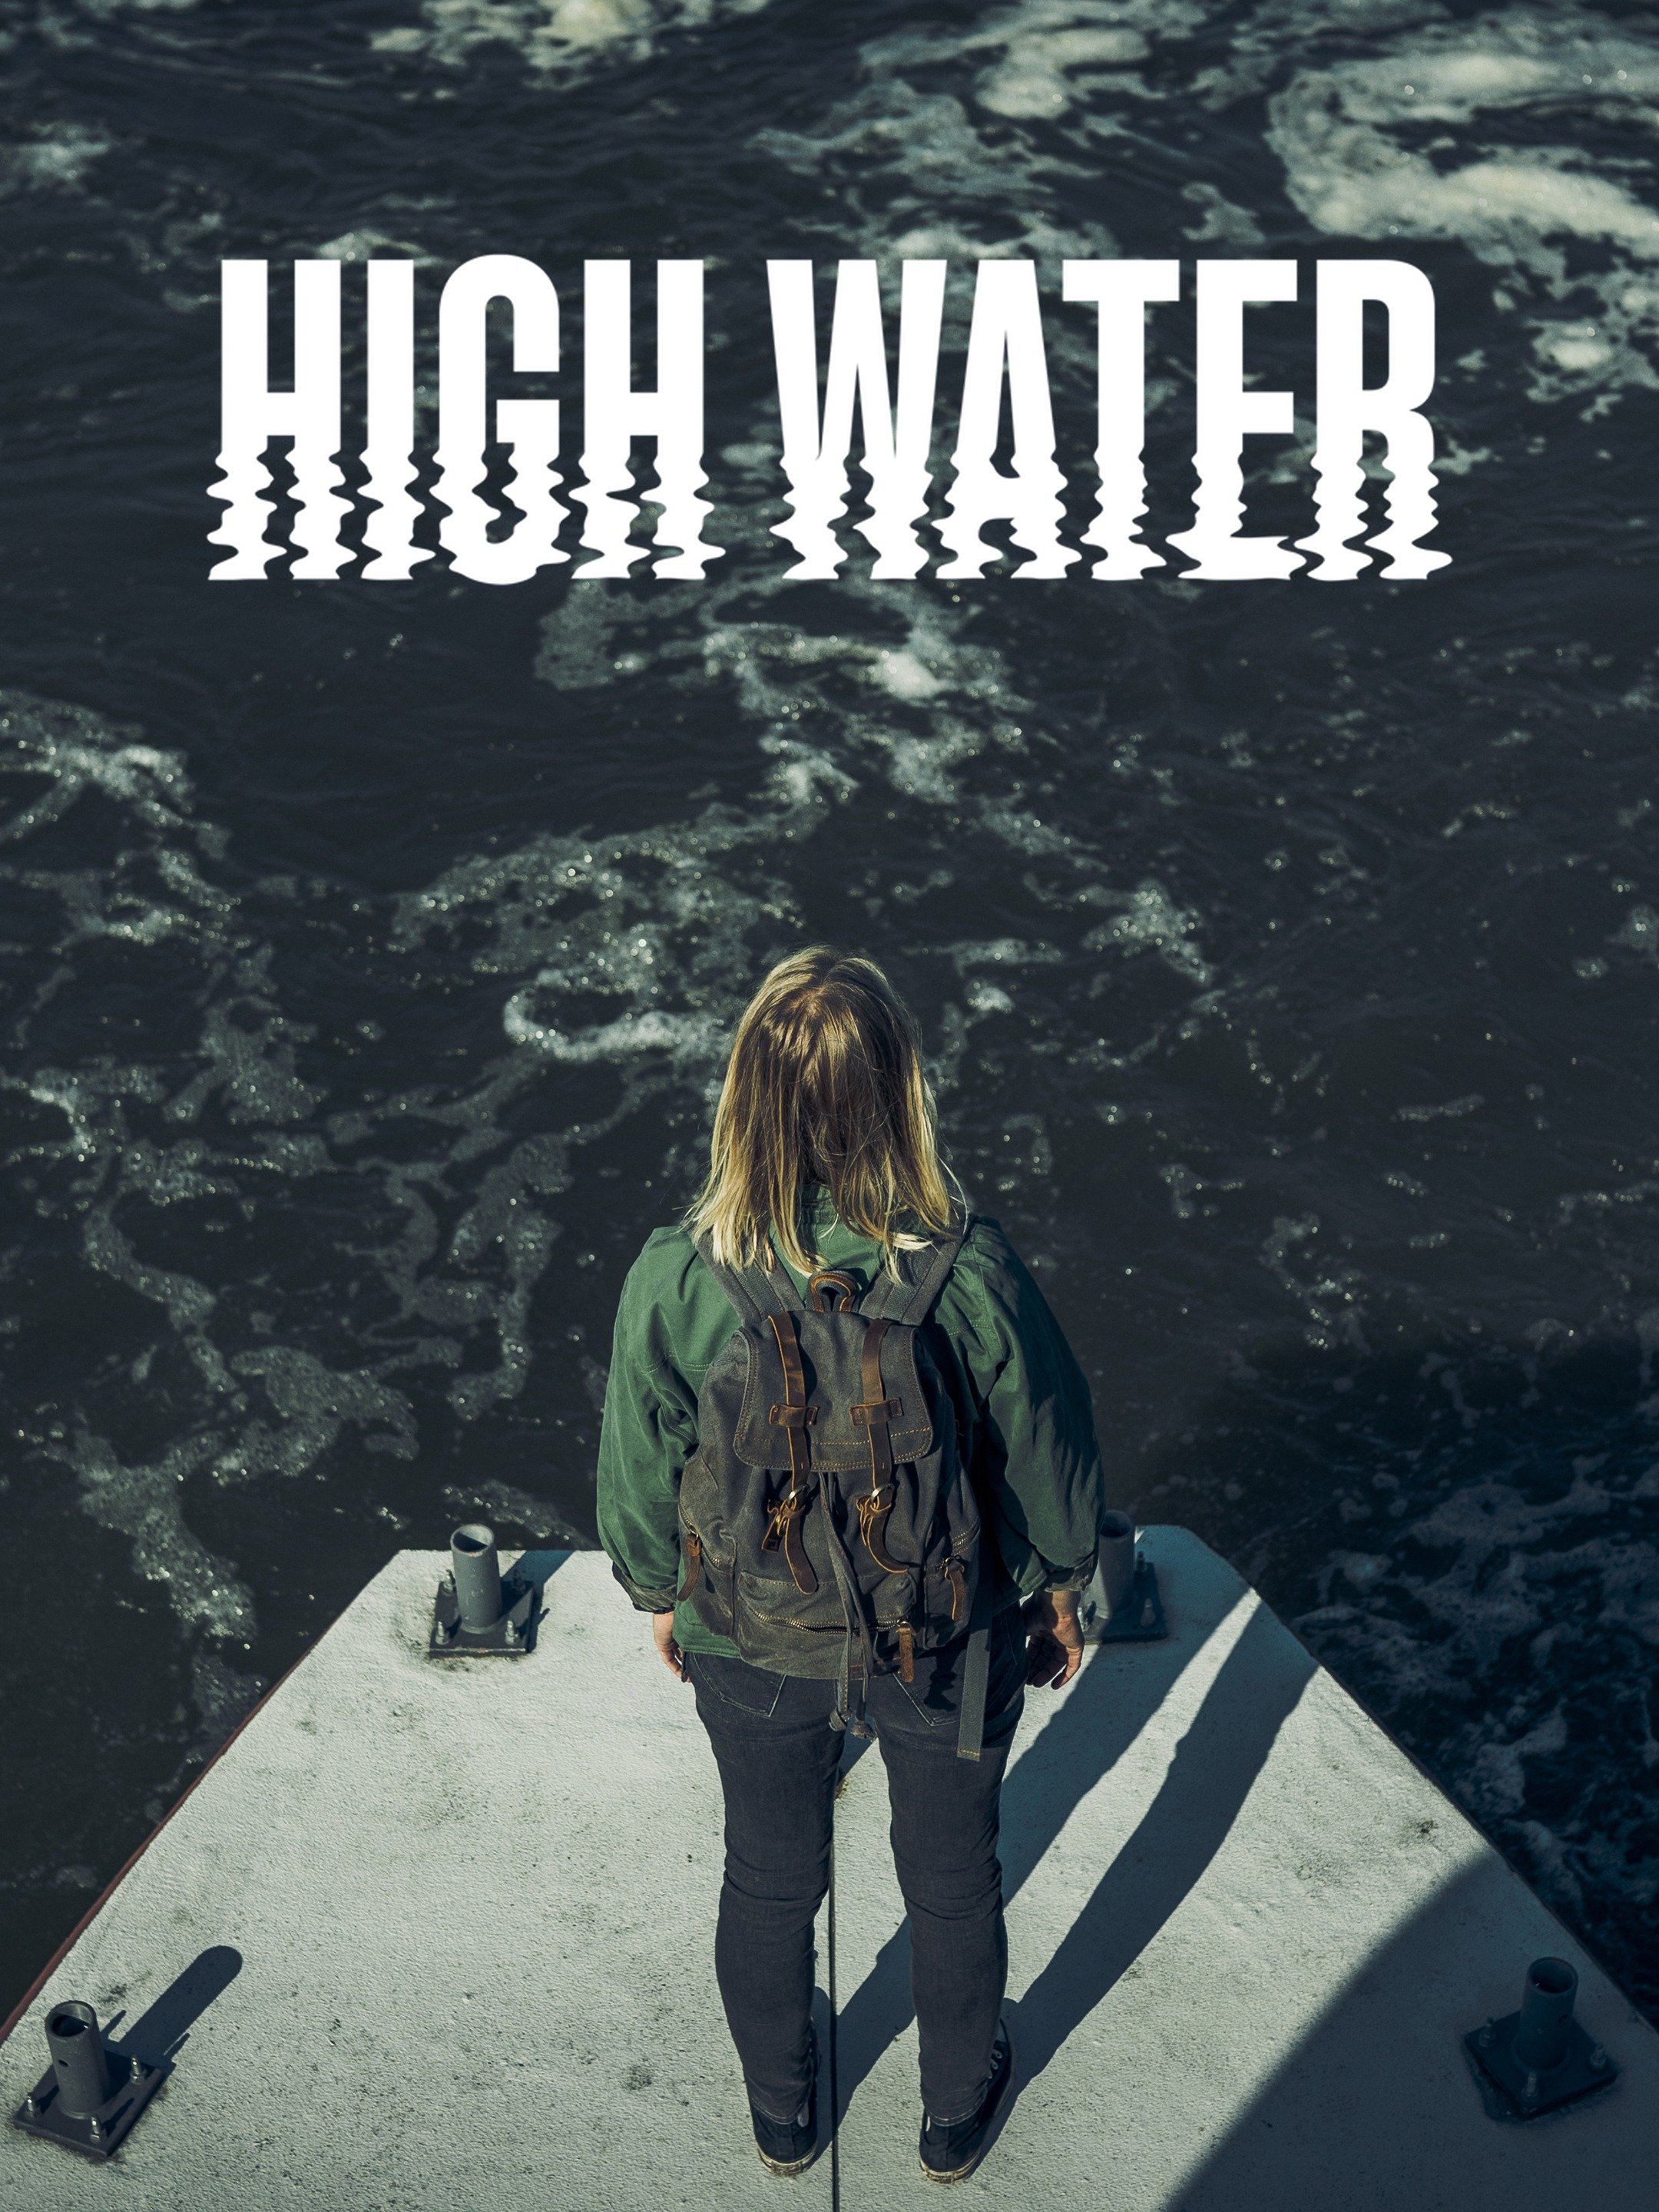 movie review high water